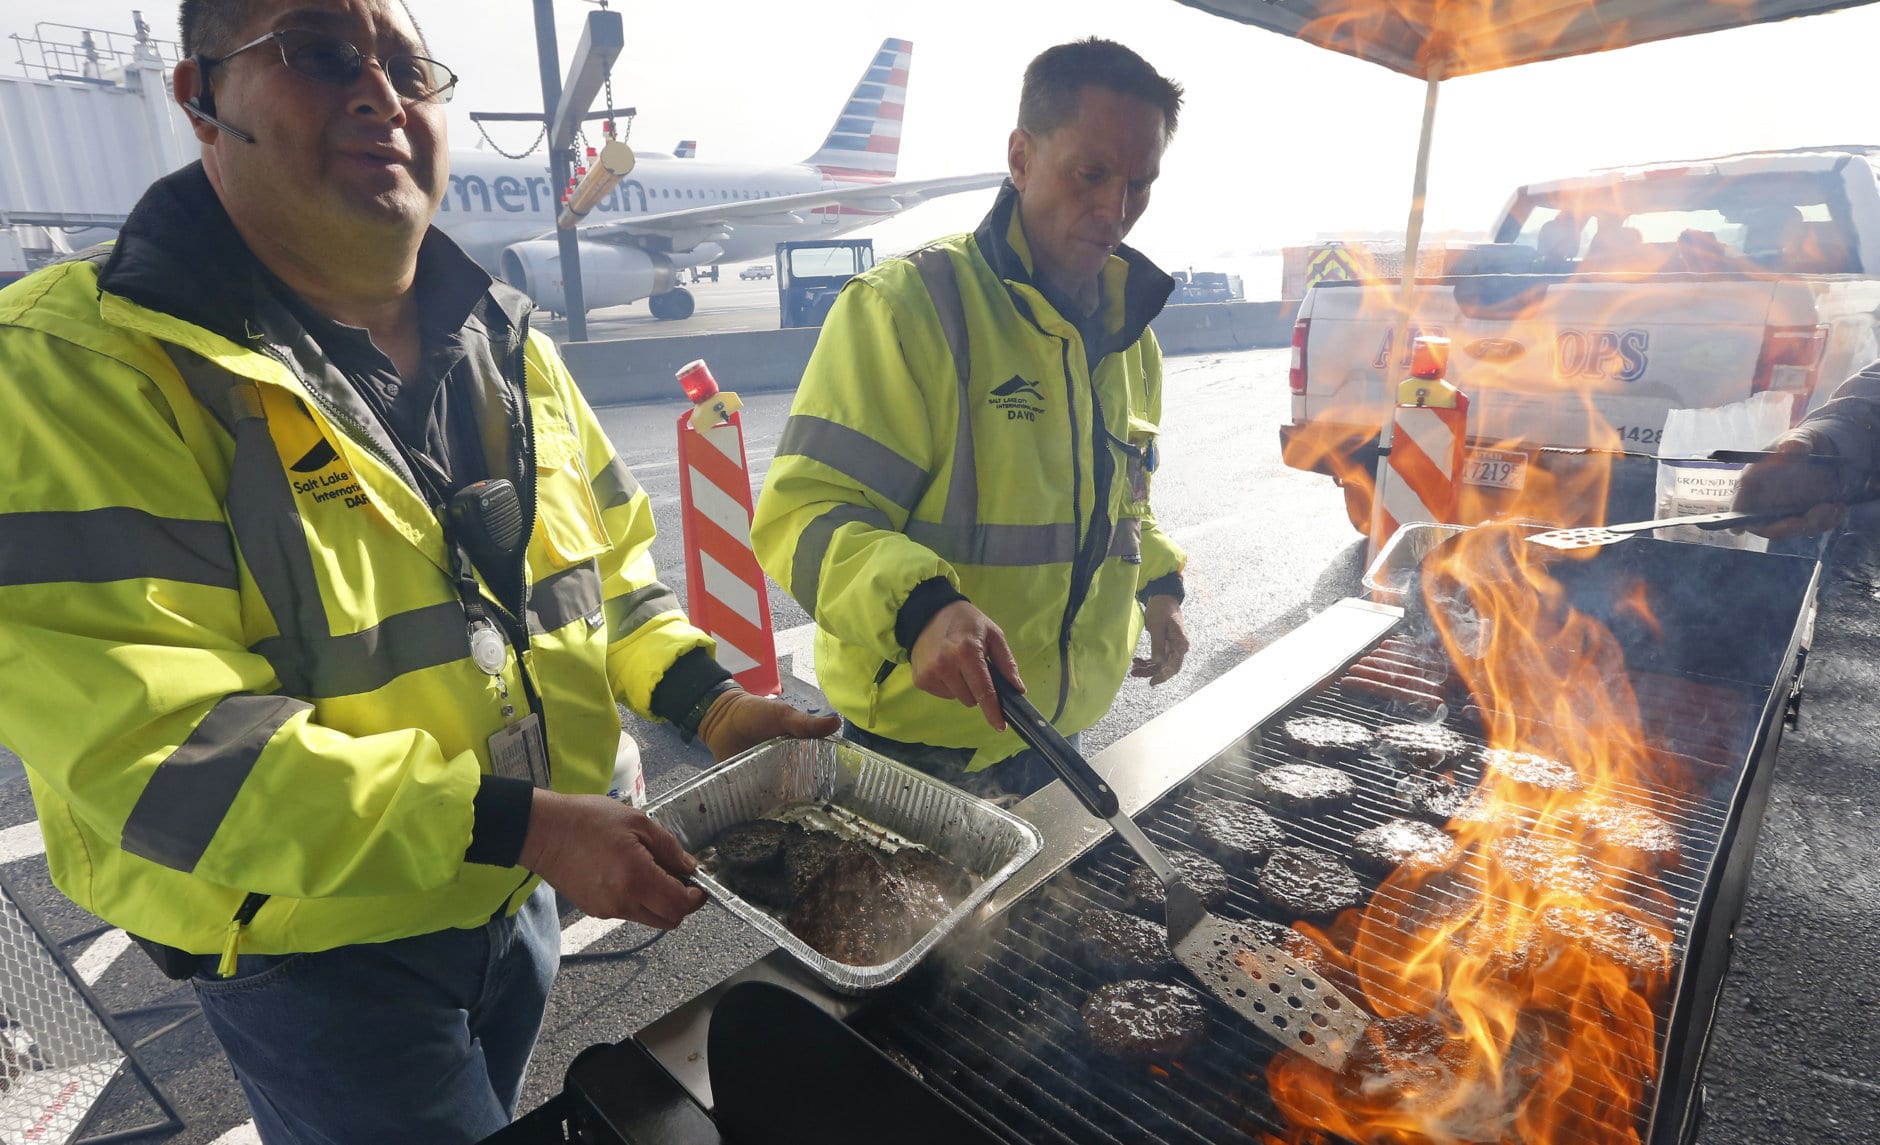 Airport operation workers wearing fluorescent safety jackets flipped burgers and hot dogs on a grill set up on a tarmac in front of a plane at Salt Lake City International Airport, Wednesday, Jan. 16, 2019, in Salt Lake City. In Salt Lake City, airport officials treated workers from the TSA, FAA and Customs and Border Protection to a free barbecue lunch as a gesture to keep their spirits up during a difficult time. (AP Photo/Rick Bowmer)